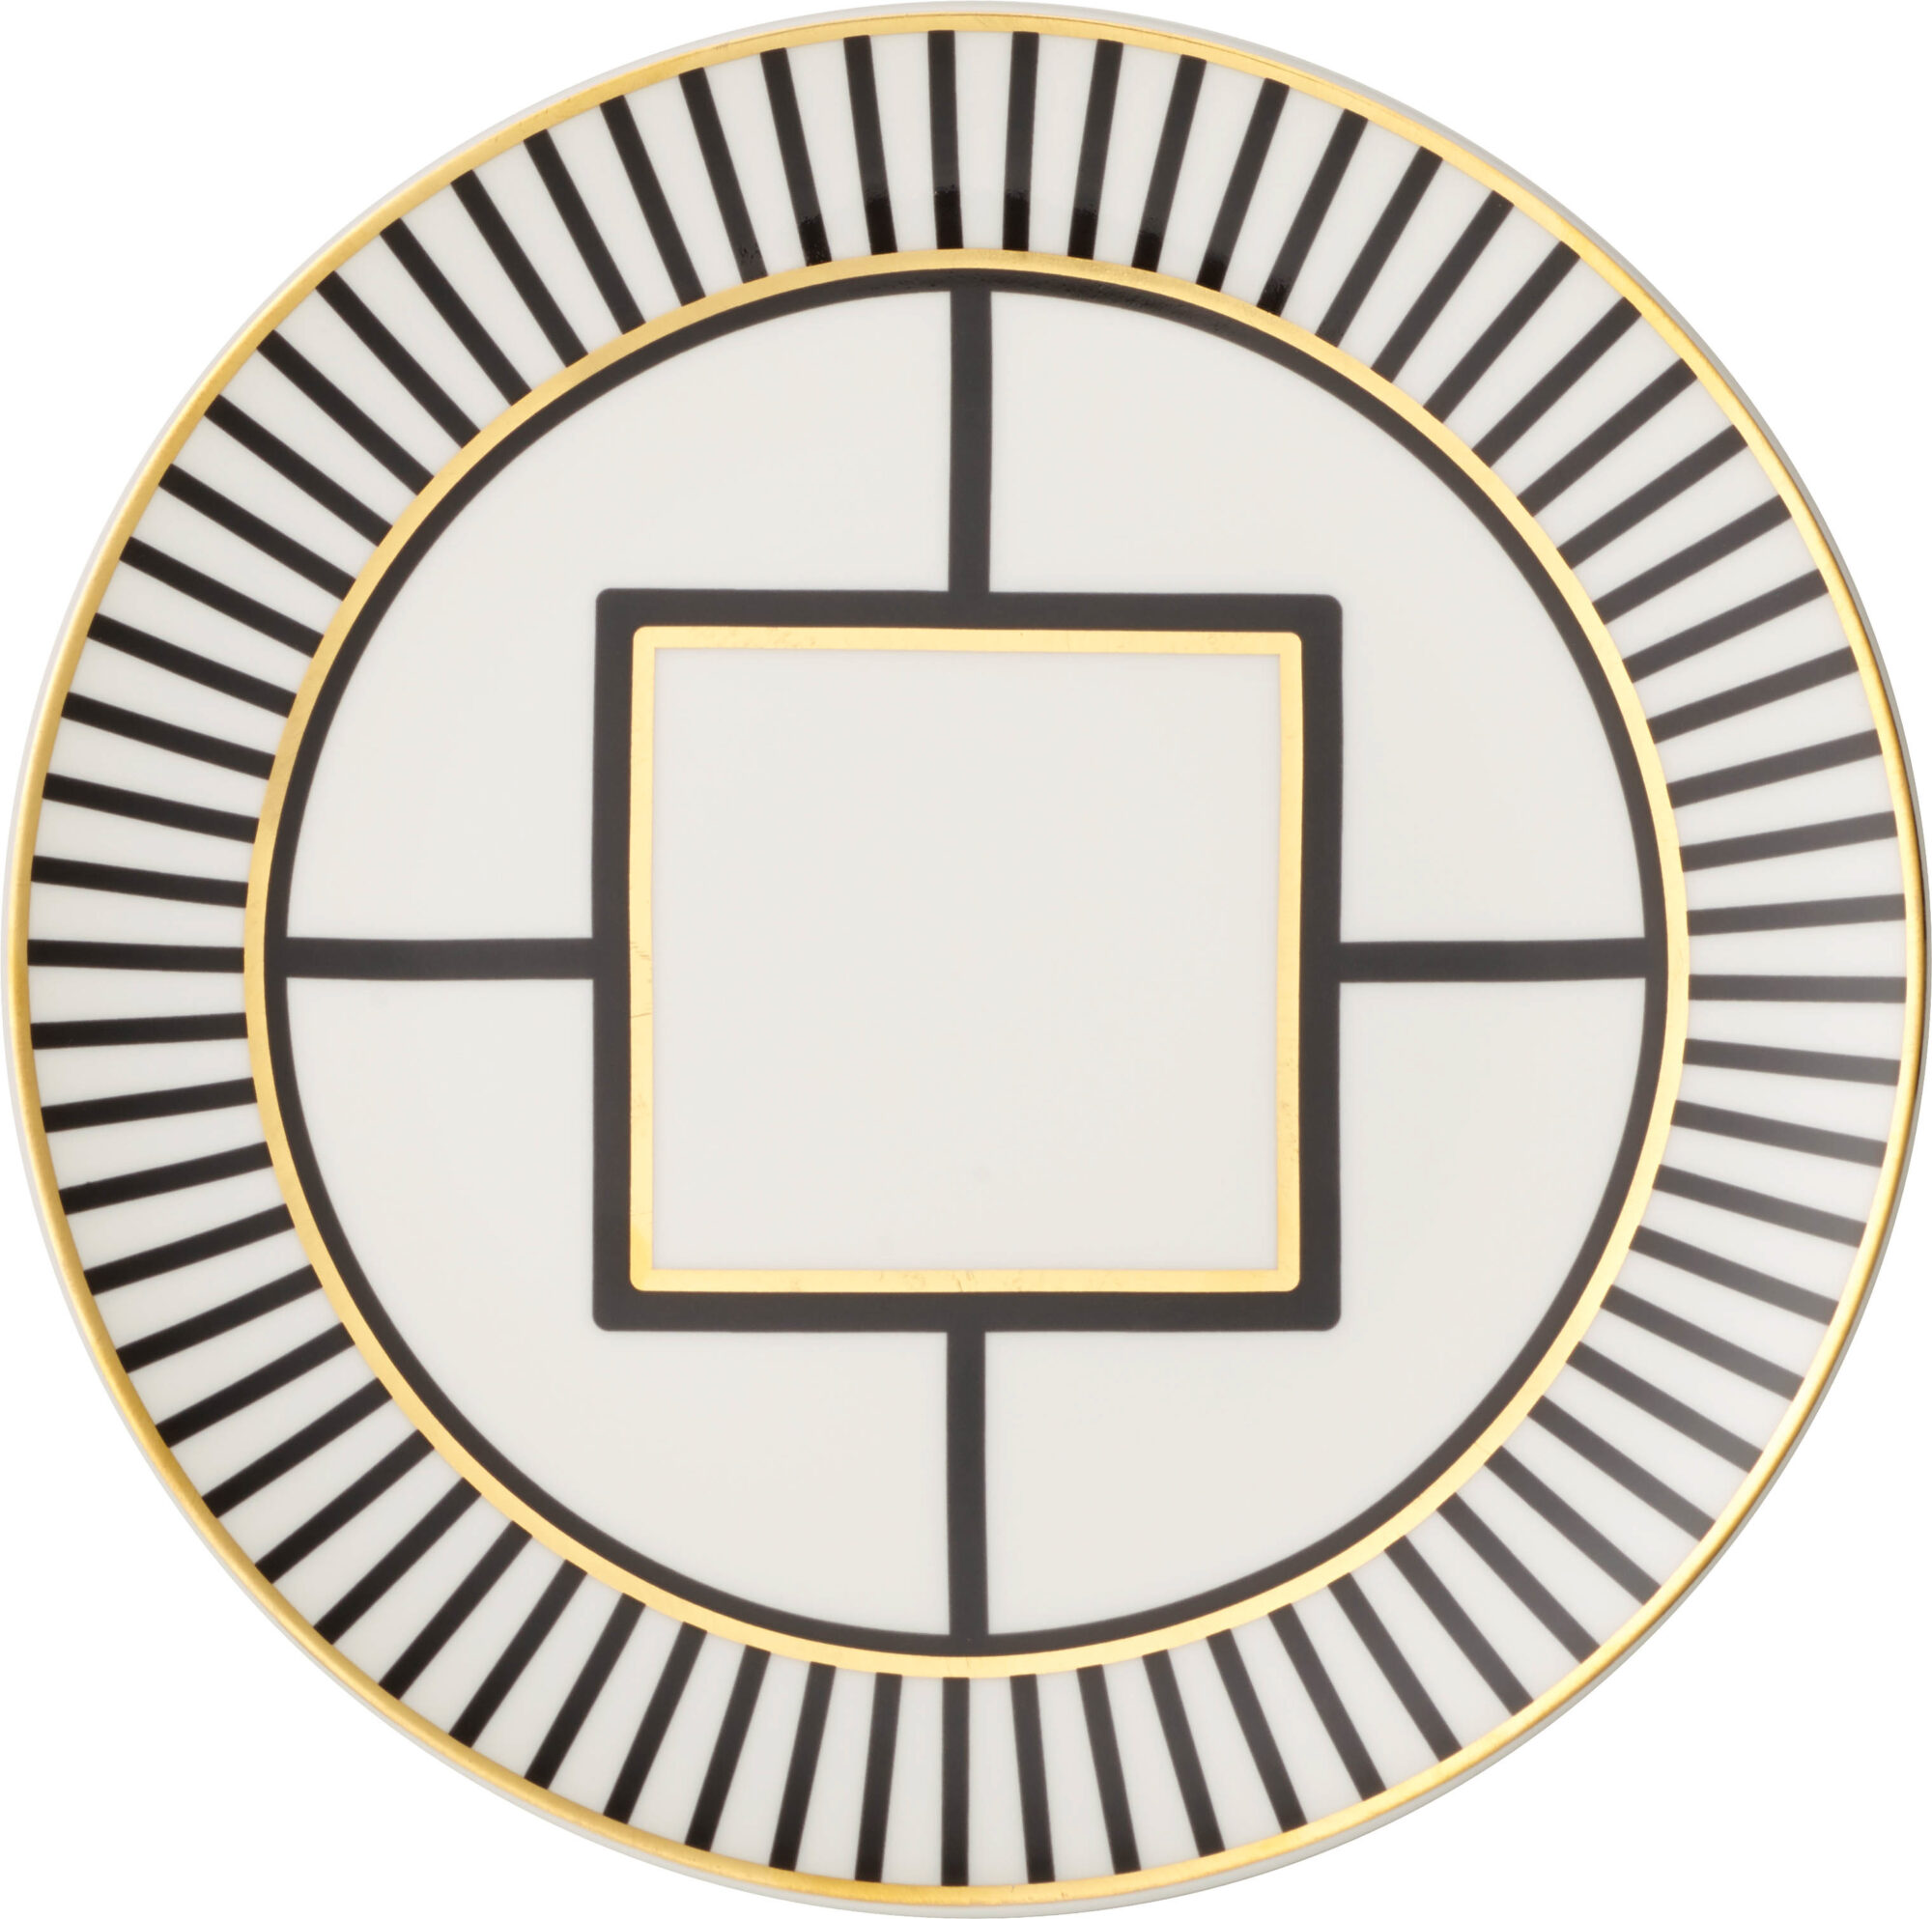 large circular plate with square shapes, inspired by this Frank Lloyd Wright home